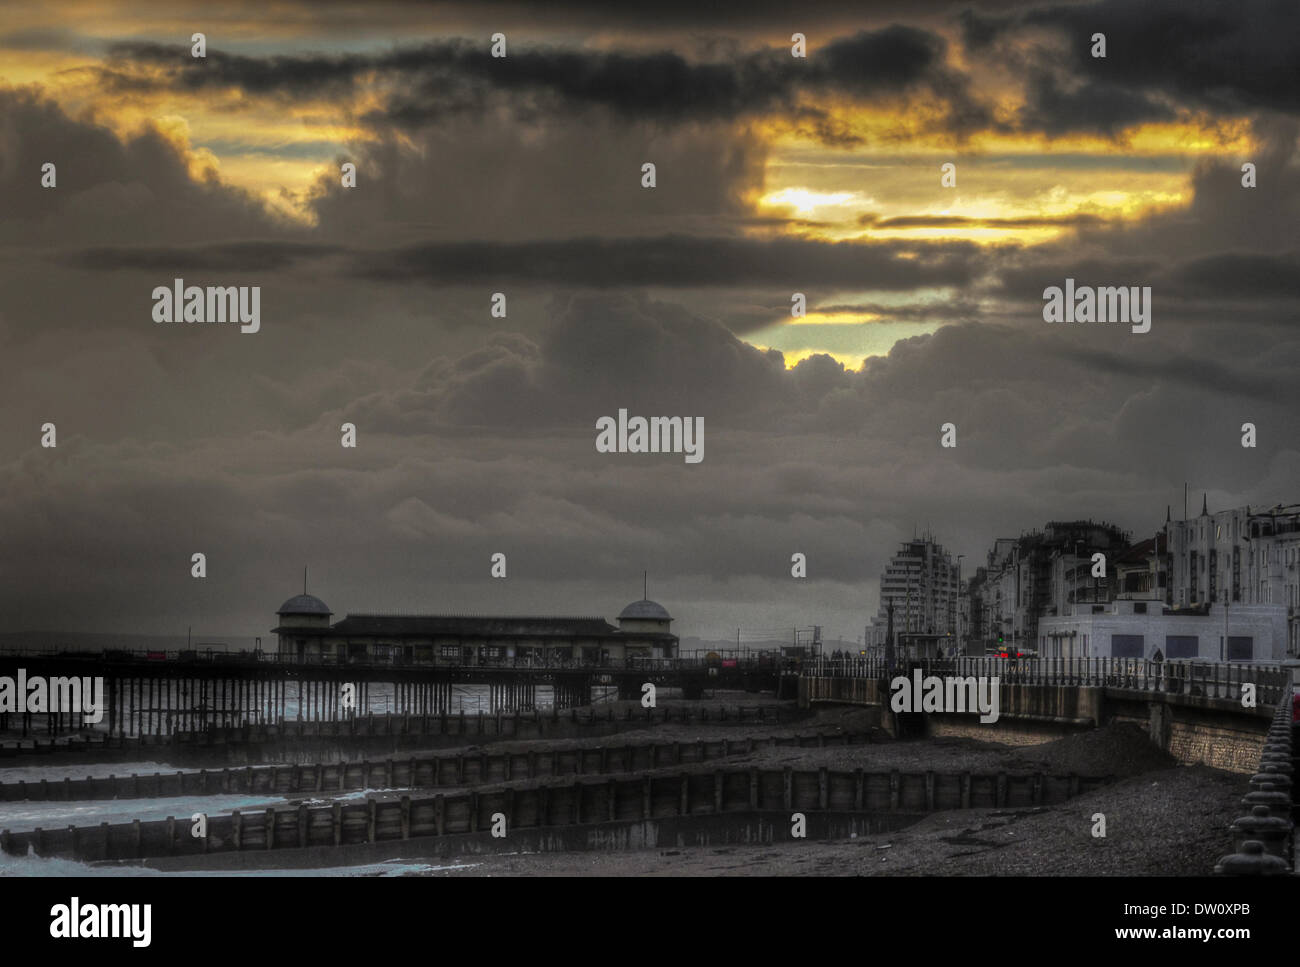 Hastings, East Sussex, UK..25 Feb 2014..Setting sun shines through storm clouds over Hastings Pier and town after a day of heavy showers and sunny intervals. HDR image. David Burr/Alamy Live News. Stock Photo